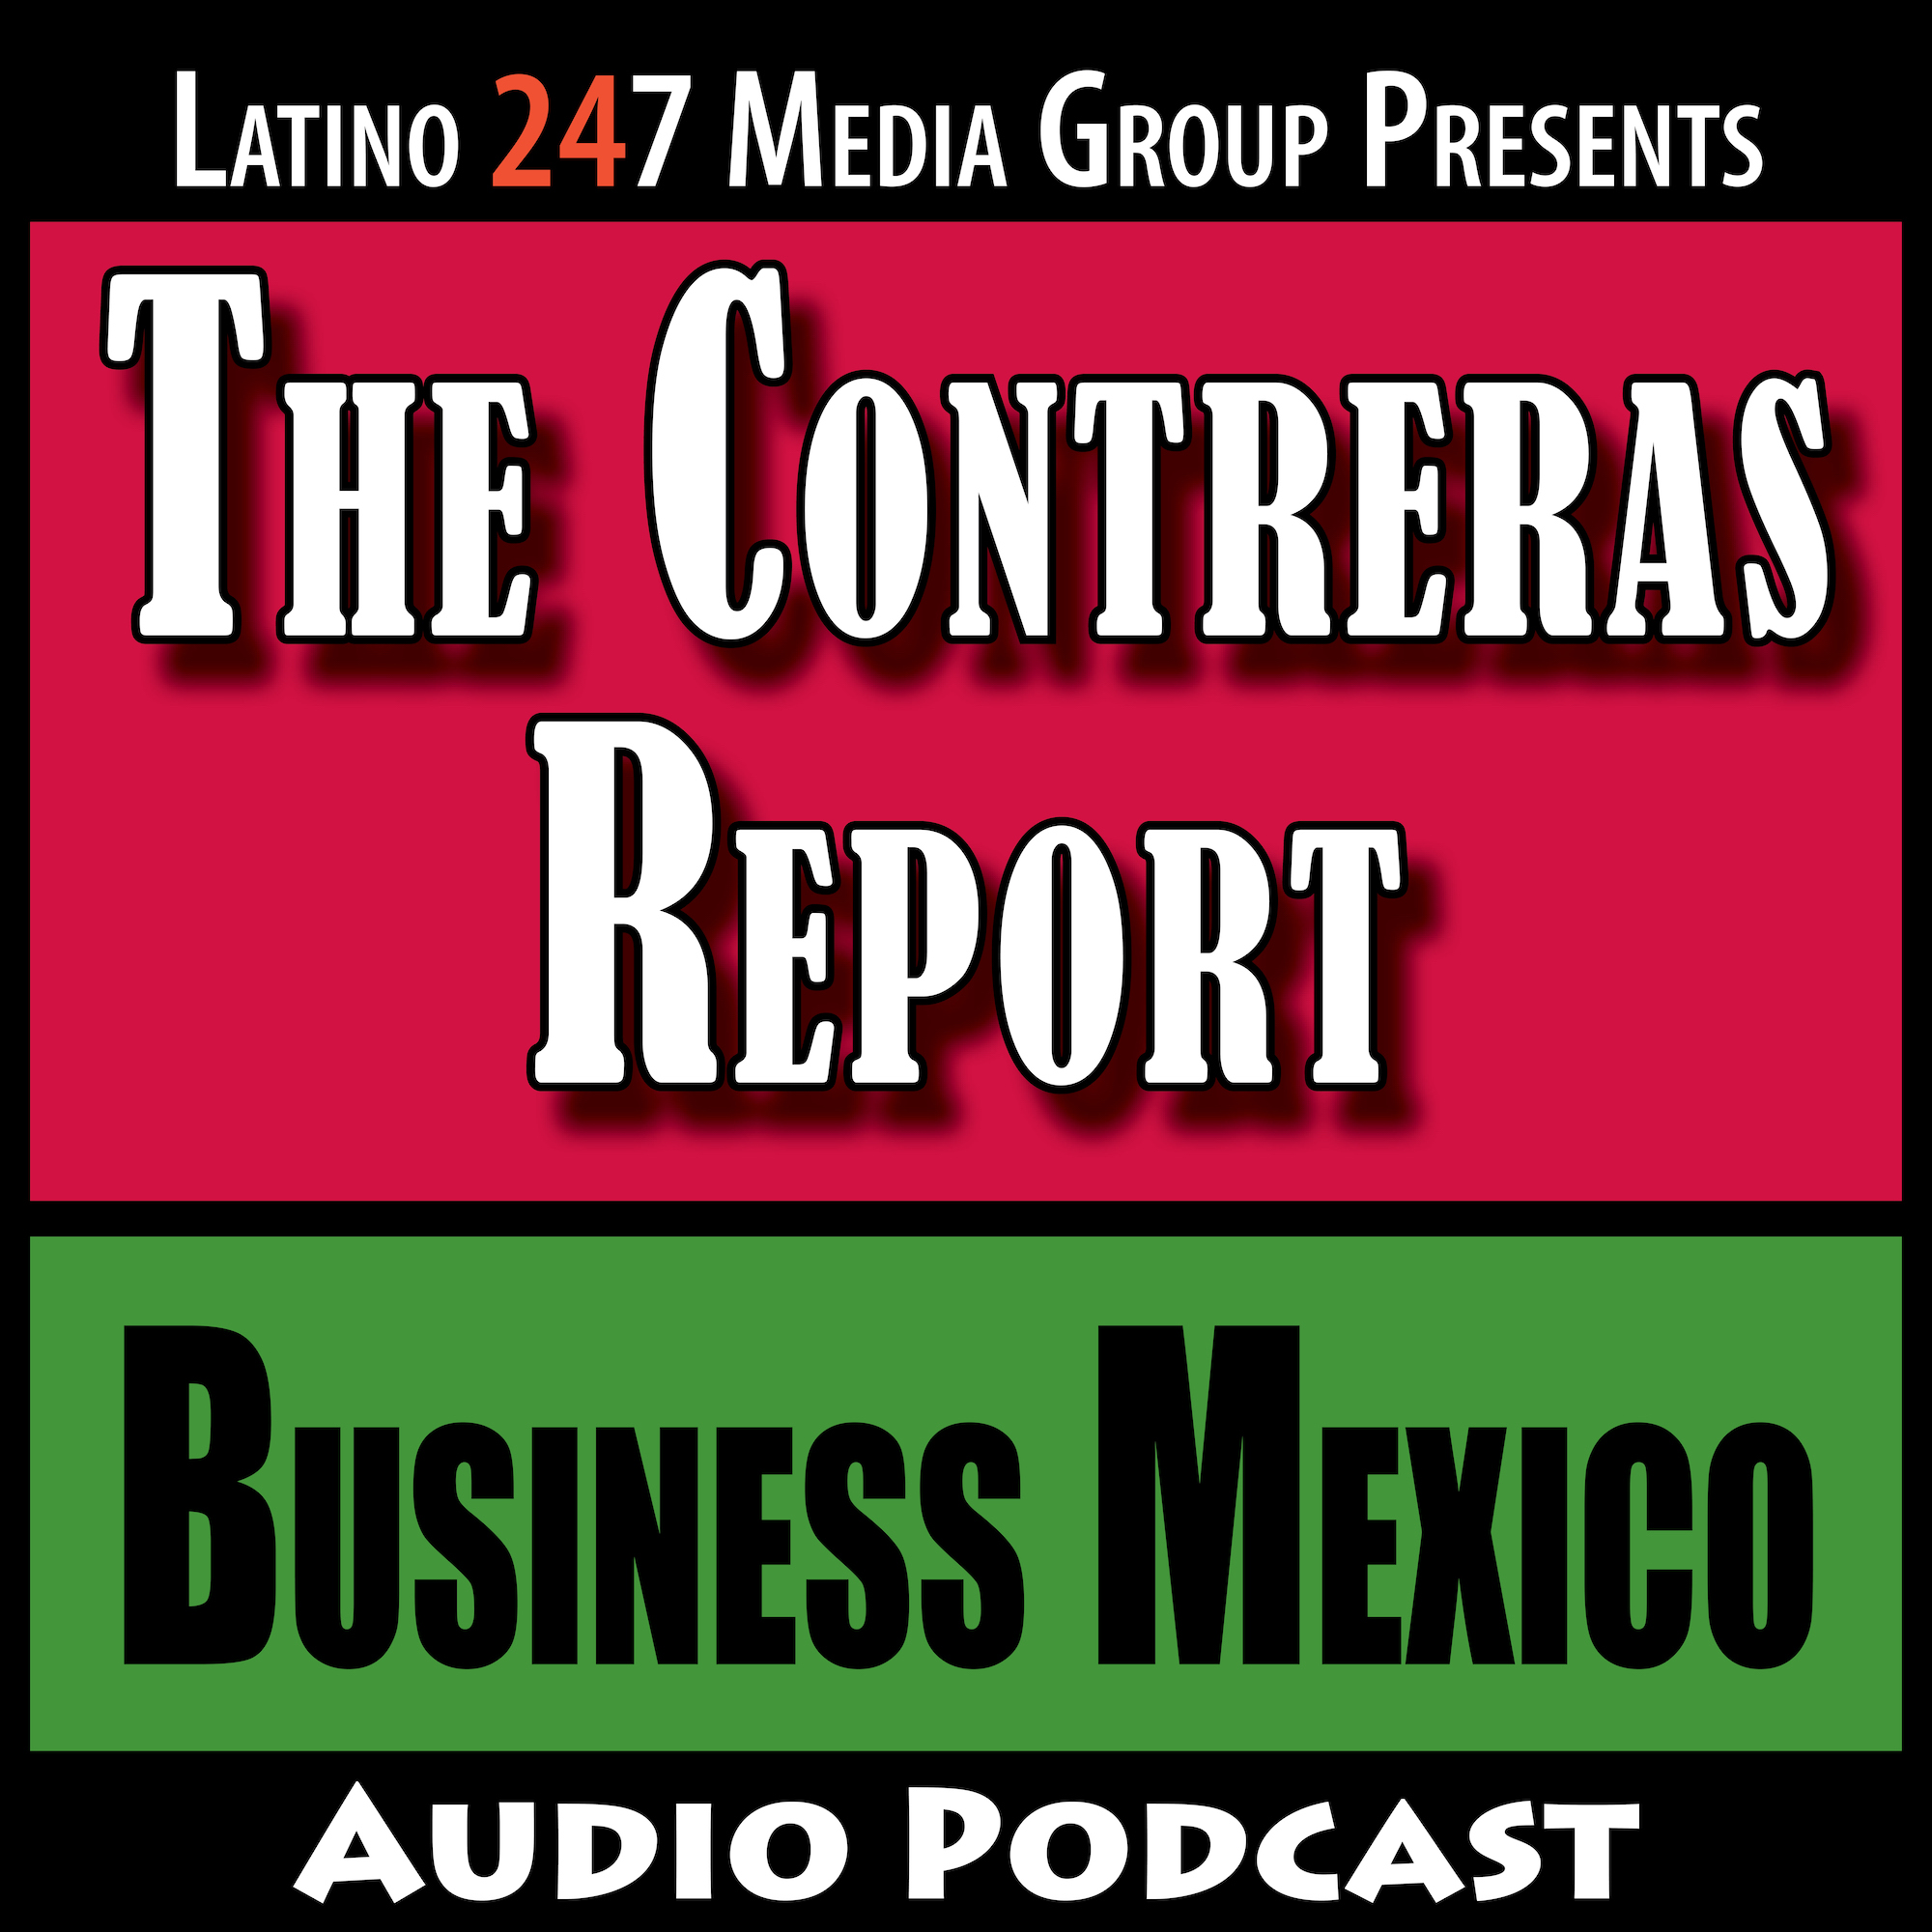 Welcome to The Contreras Report: Business Mexico